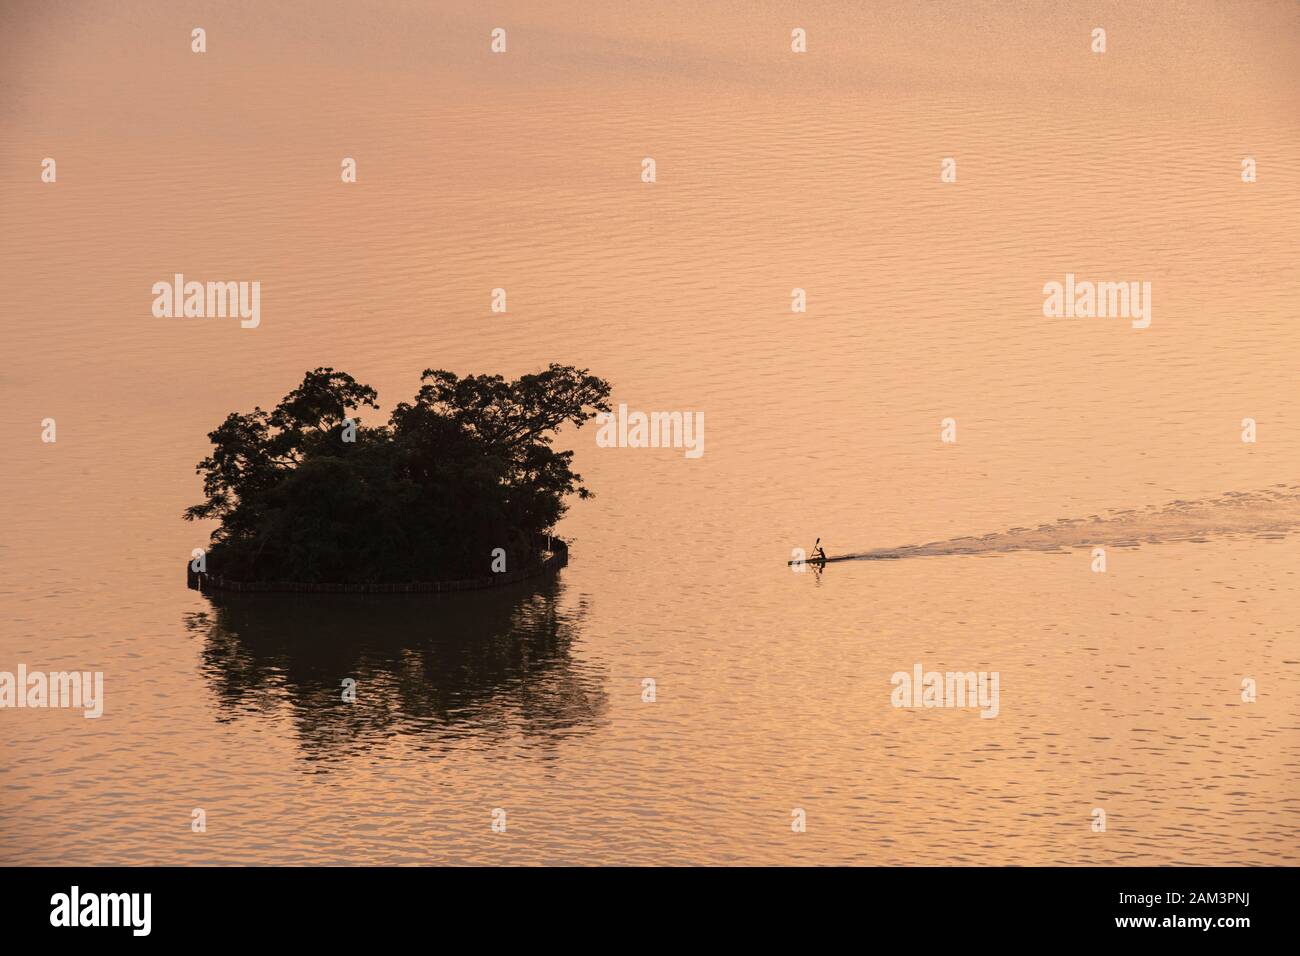 A lone canoeist paddles towards an island at sunset in the Seven Star Crags national park (Qixing Yan), near zhaoqing, People's Republic of China Stock Photo